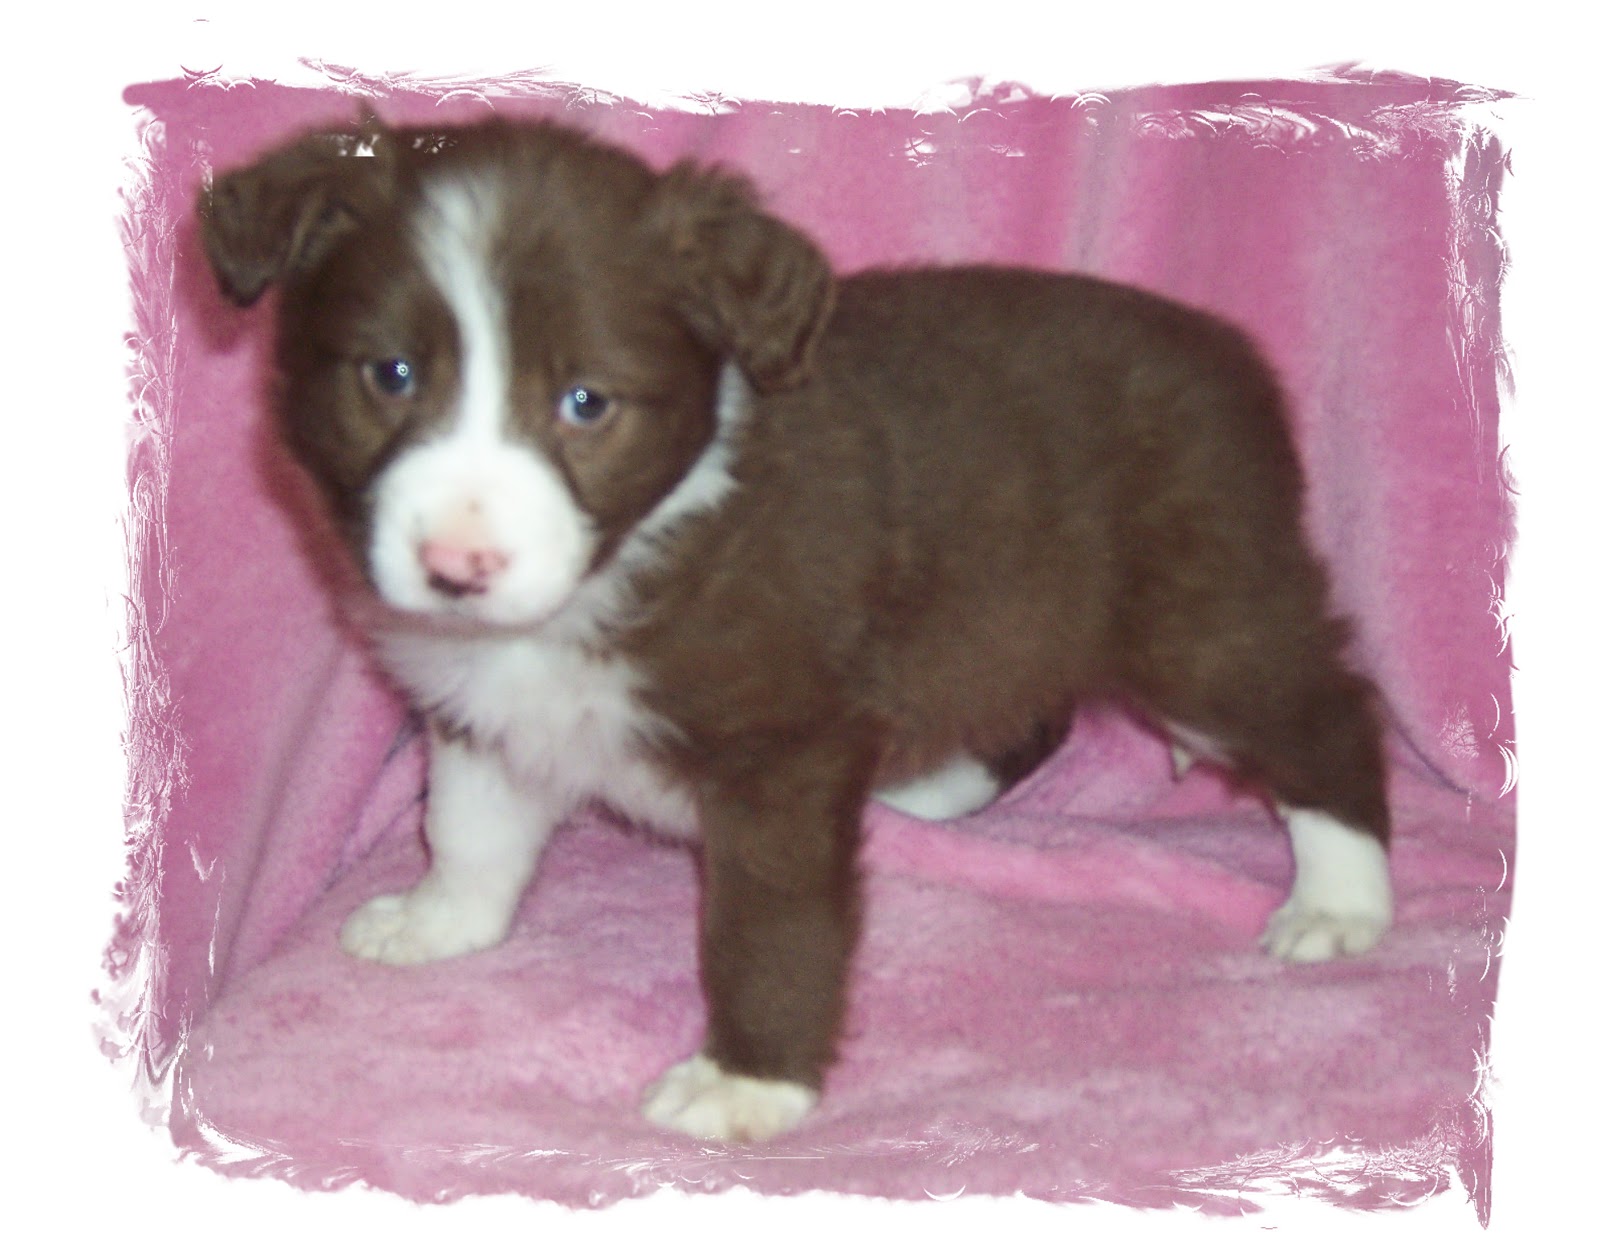 Cute Puppy Dogs brown border collie puppies